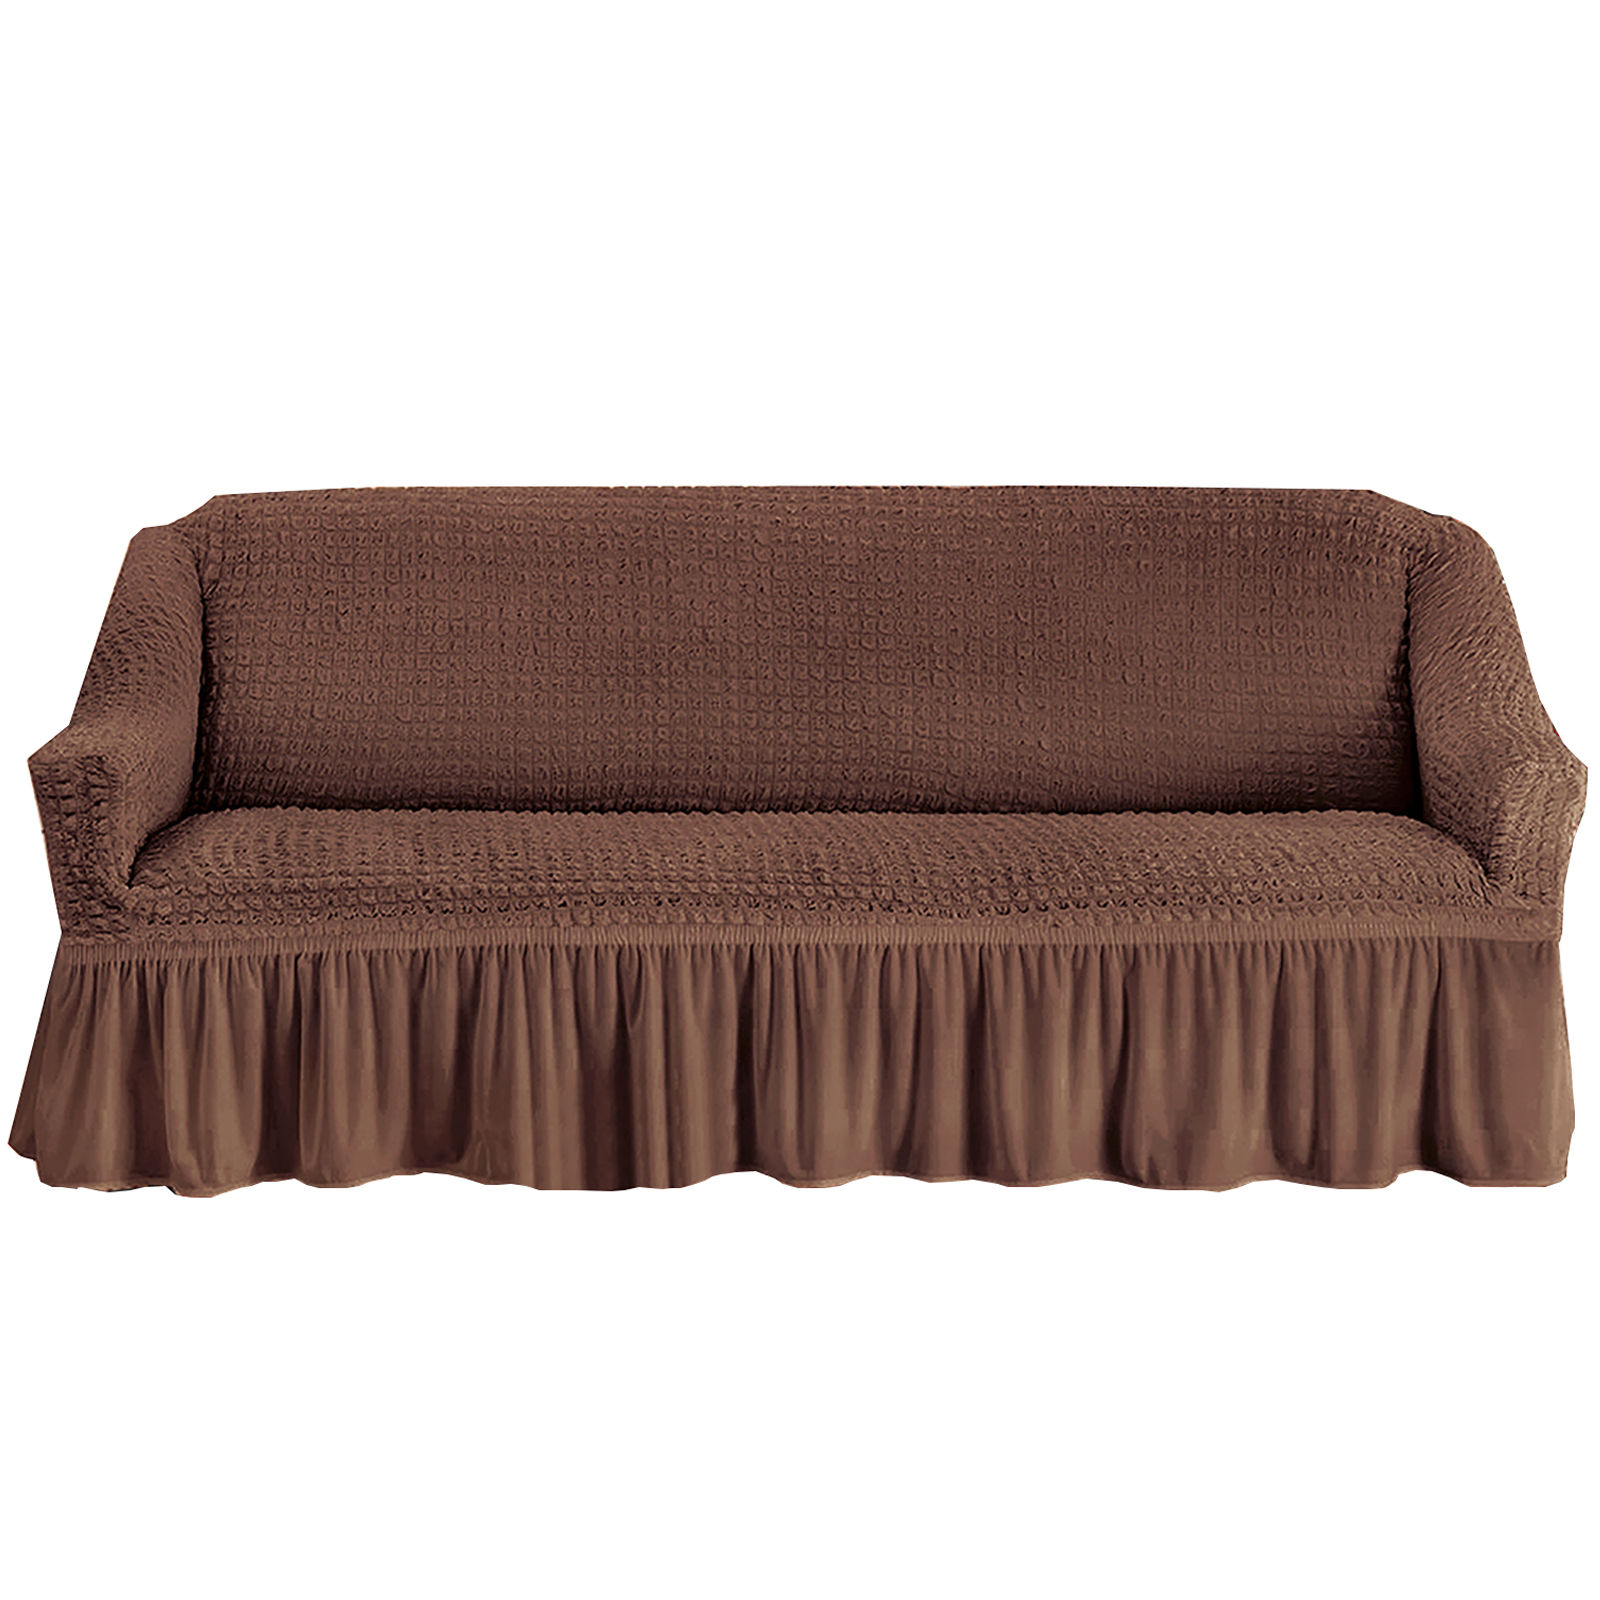 Stretch Sofa Slipcover, 3 Seater Sofa Slipcovers With Skirt With Armless Soft Sofa Cover Elastic Straps Sofa Slipcover For Living Room Kids Pets-Brown B-X-Large